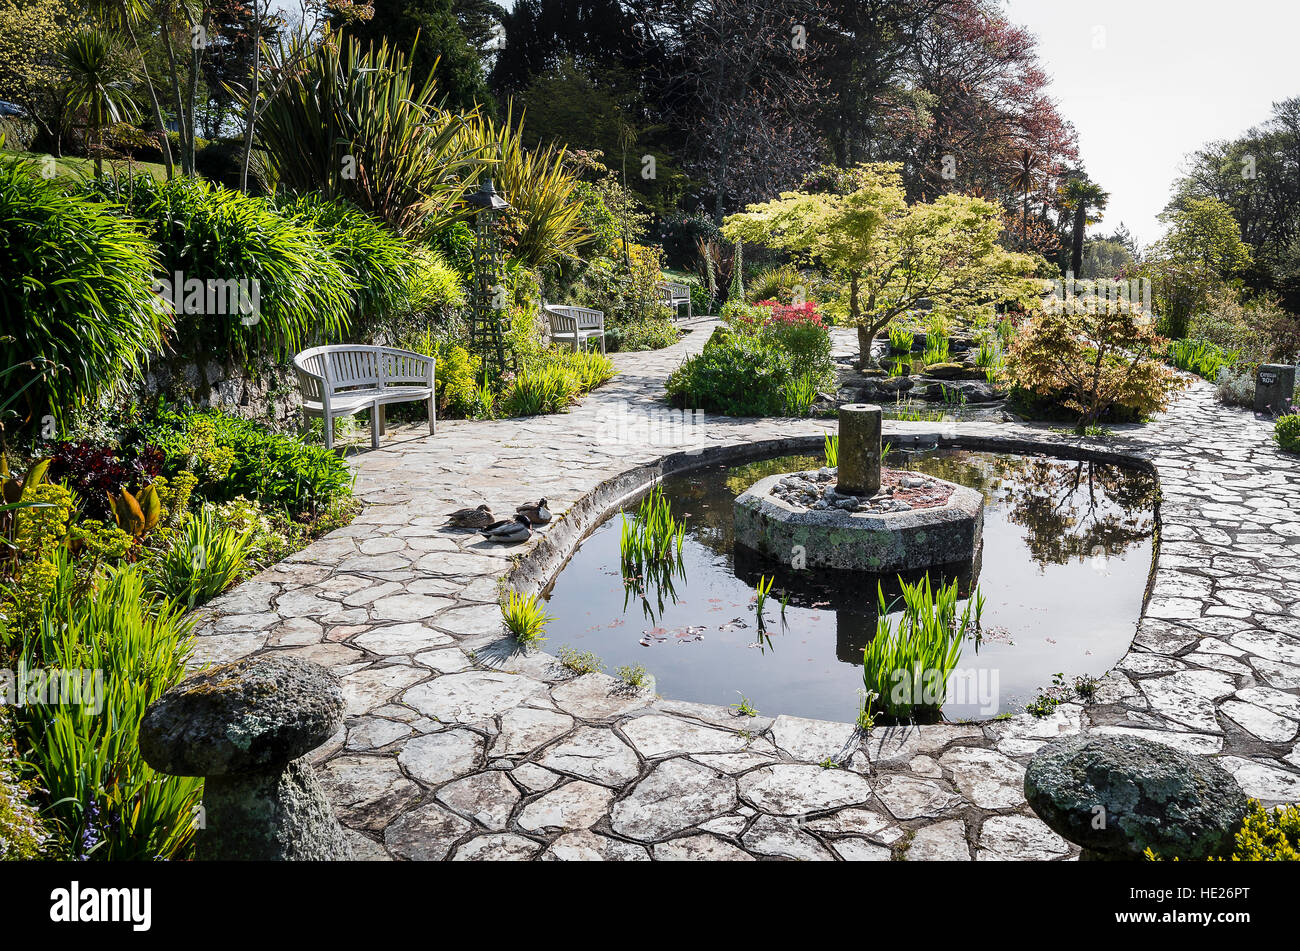 A secluded hotel garden with an ornamental pool and Cornish flora Stock Photo